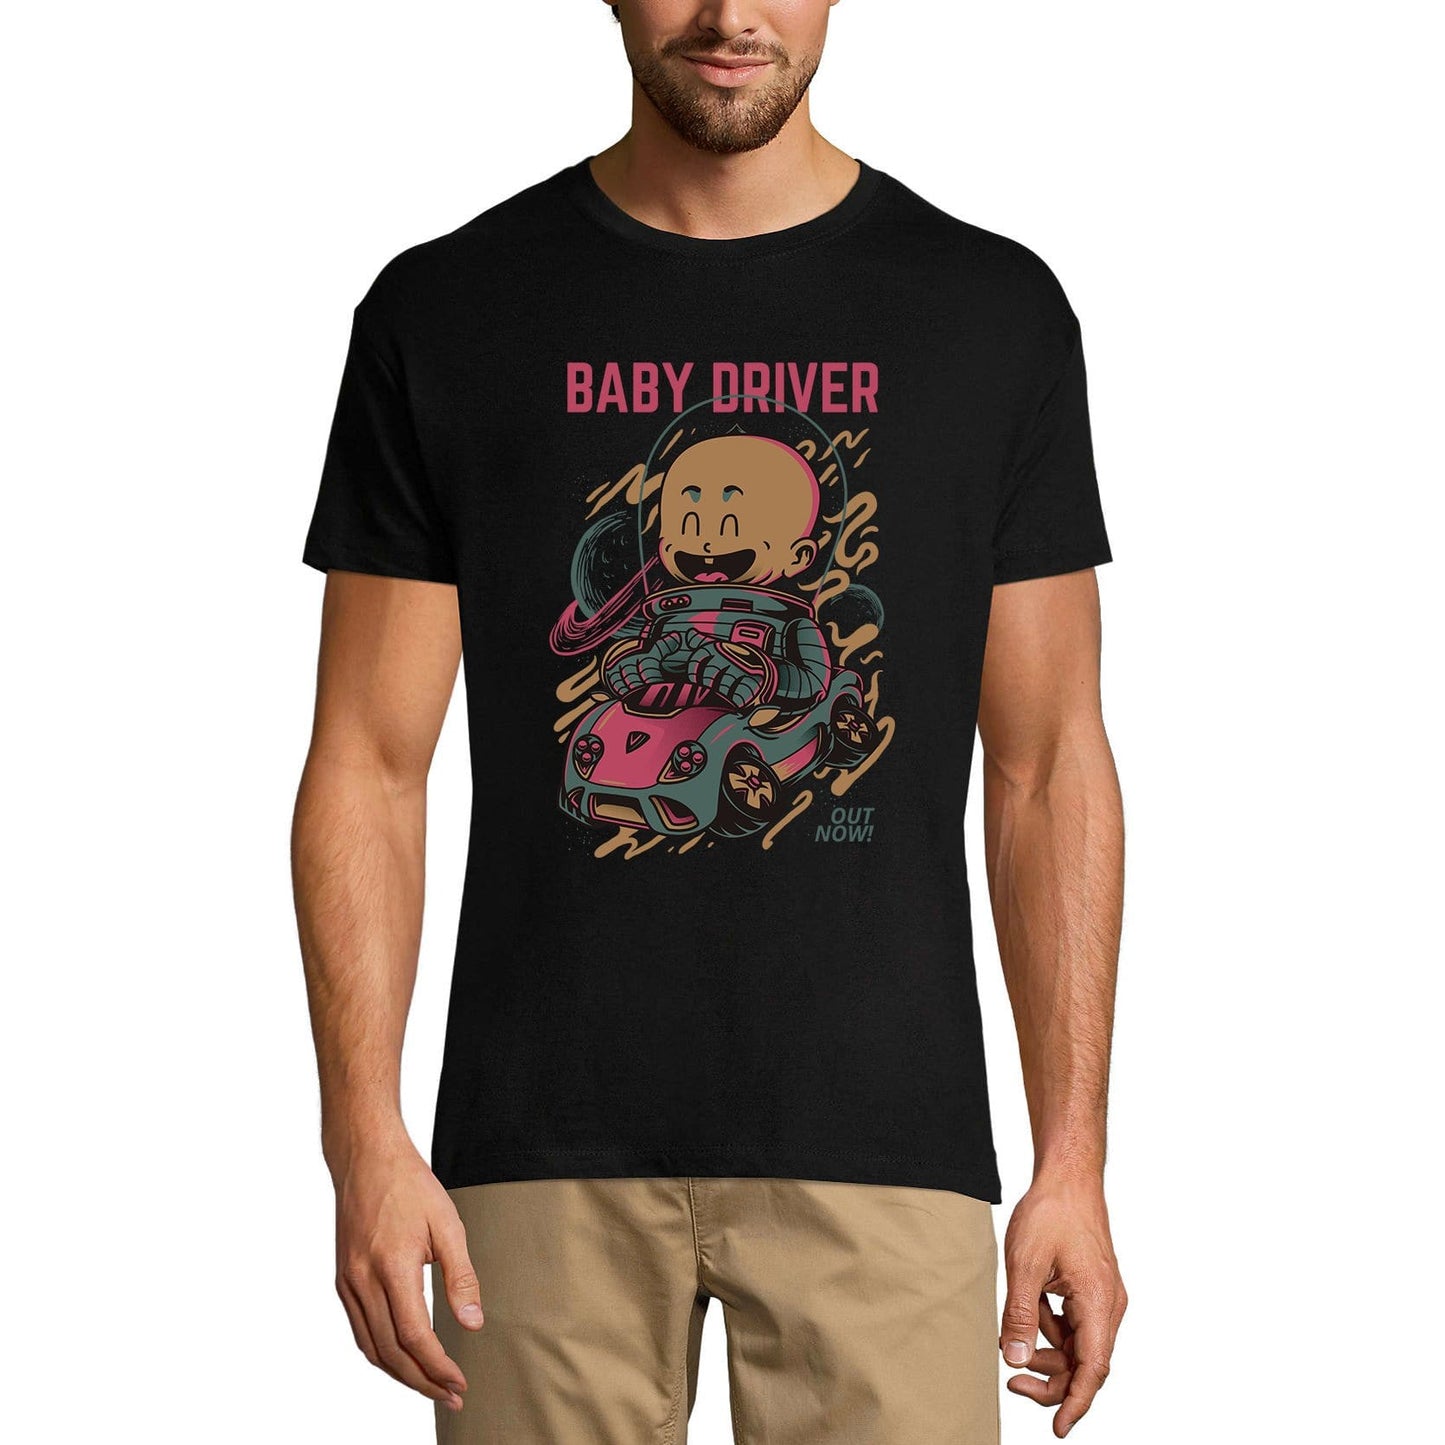 ULTRABASIC Men's Novelty T-Shirt Baby Driver Out Now - Funny Short Sleeve Tee Shirt